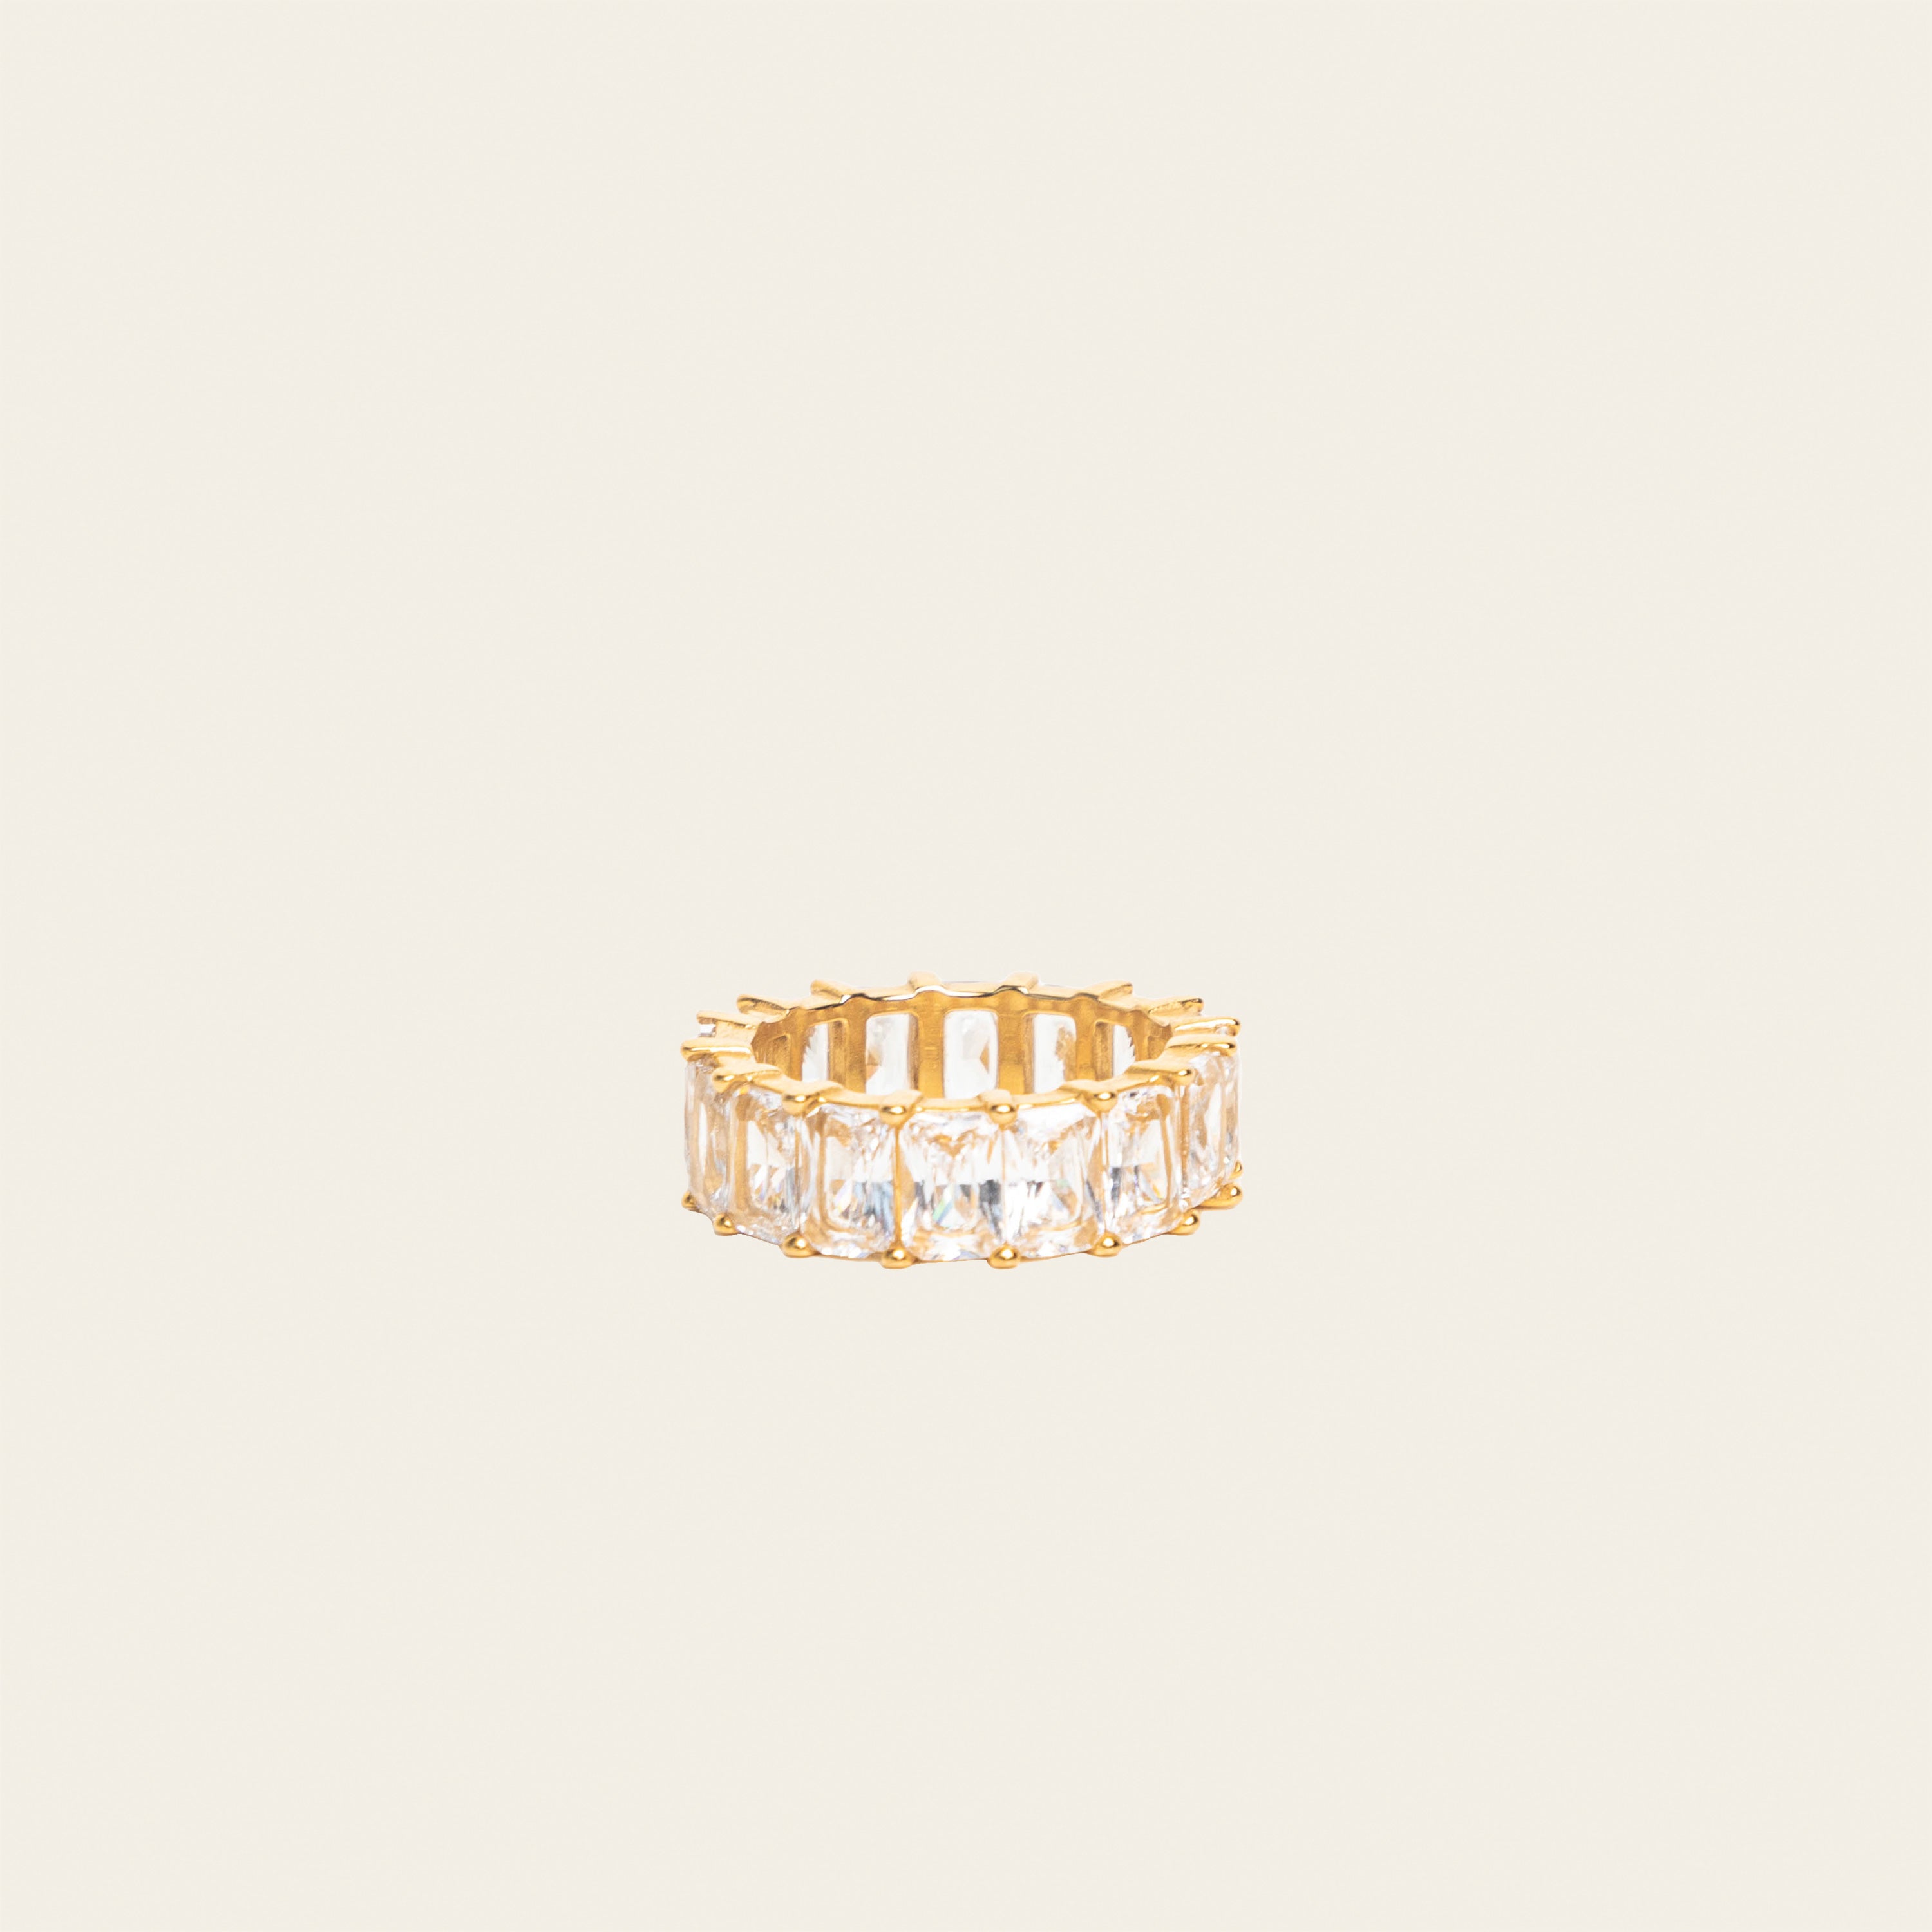 Image of the Jamie Ring boasts 18K gold plating over durable stainless steel for unrivaled resistance to tarnishing and water damage. Its sleek and timeless appeal is heightened by the non-adjustable design, making it the perfect single ring for any occasion.